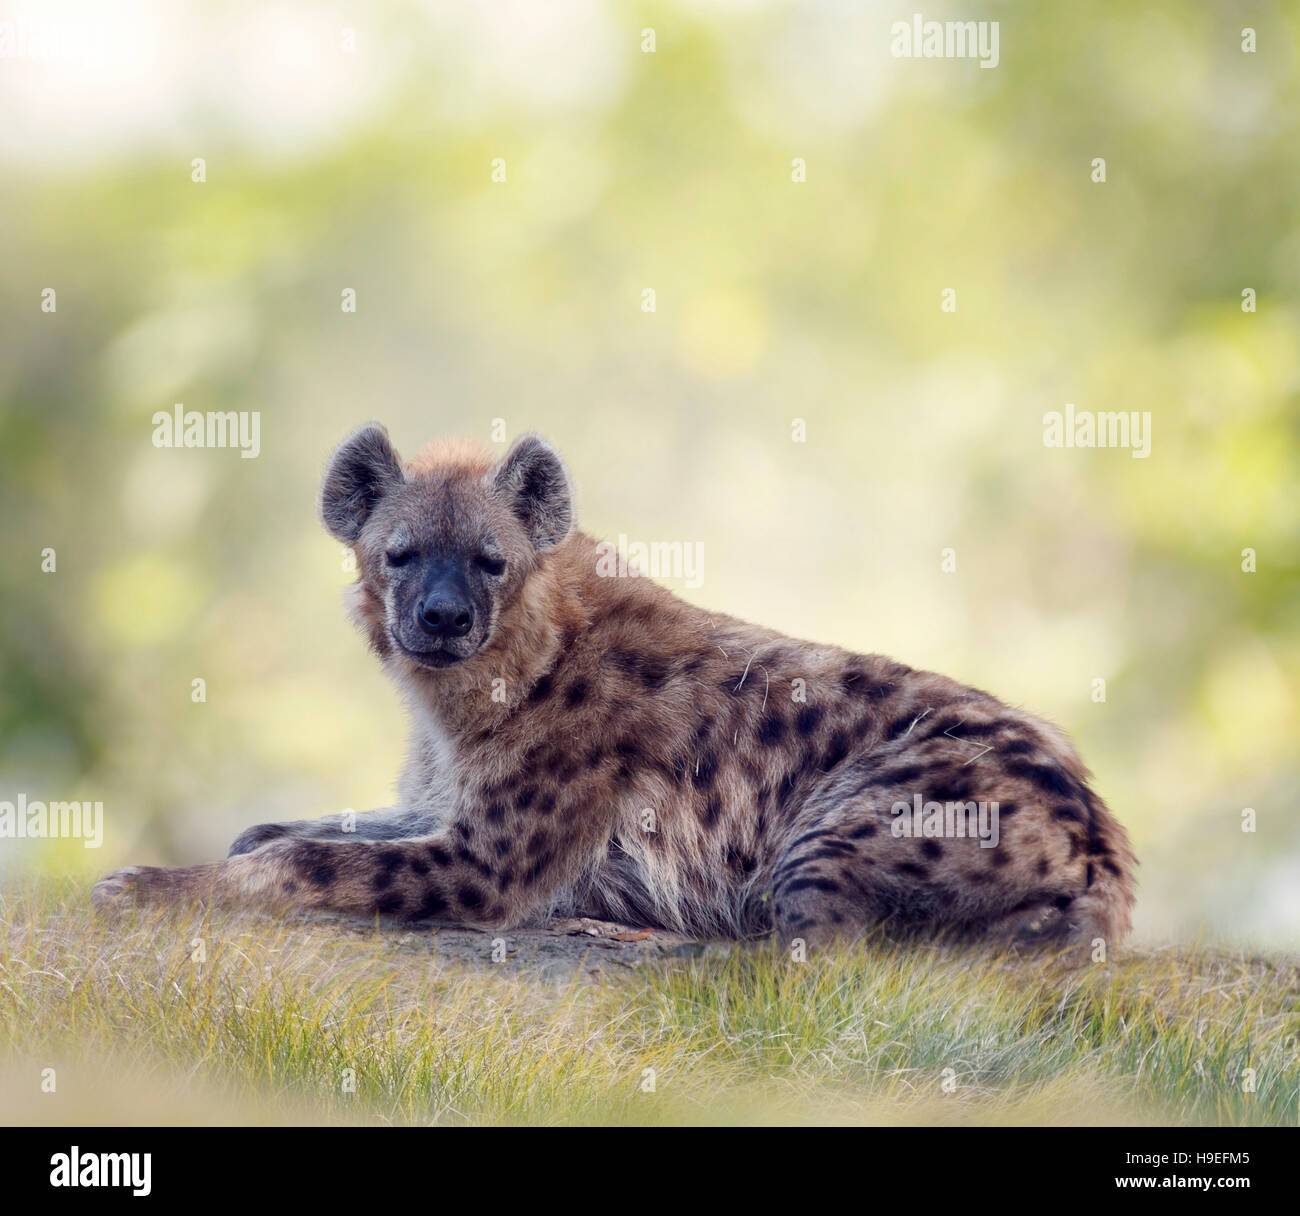 Spotted hyena resting in grassland Stock Photo